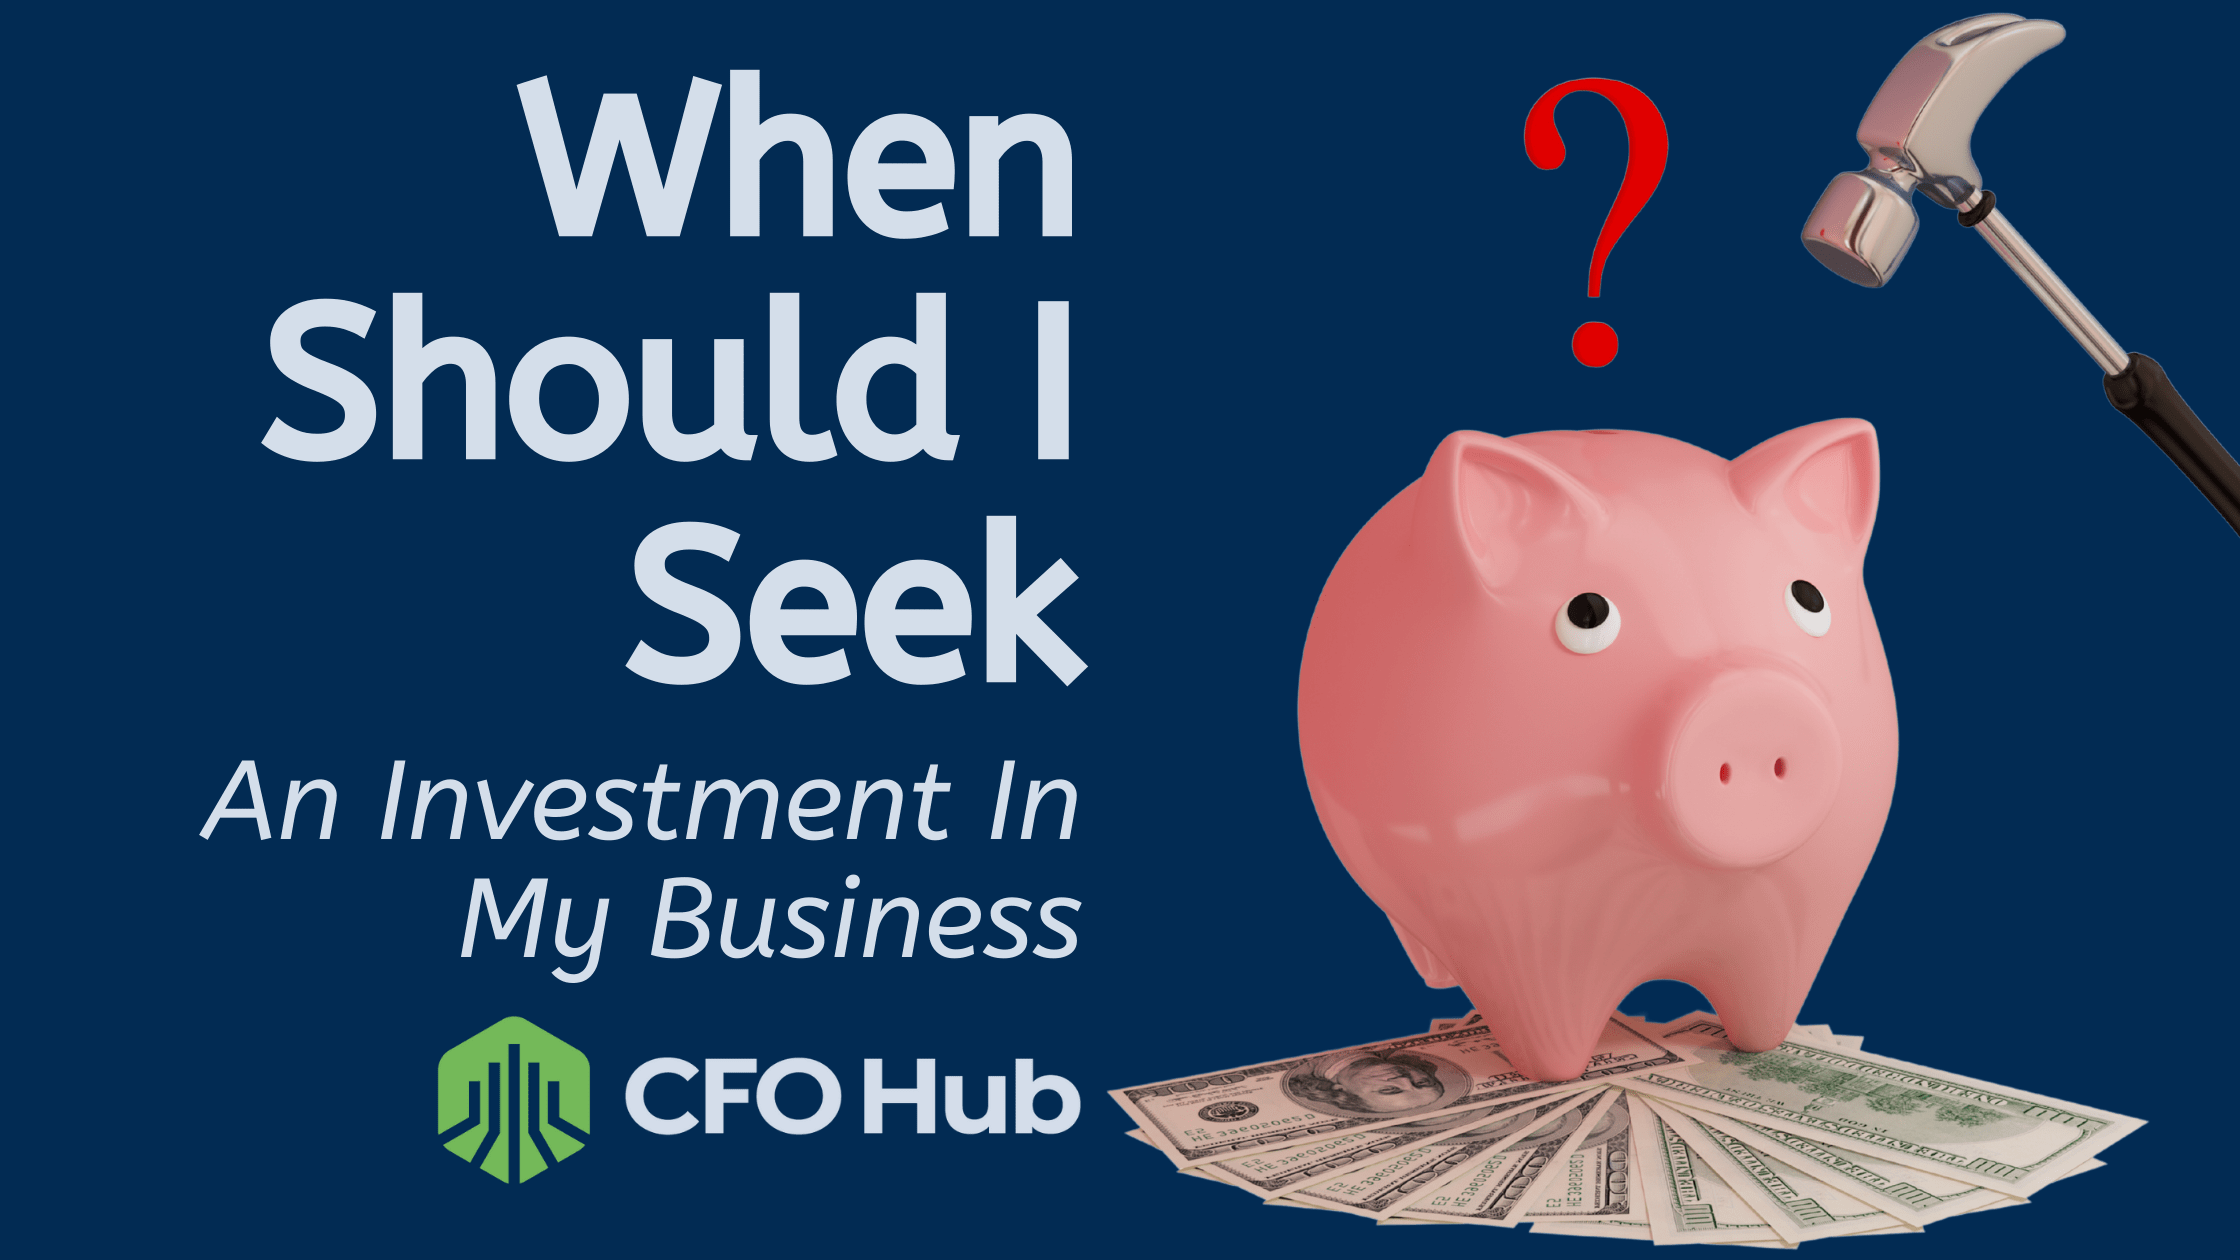 When should i seek an investment in my business